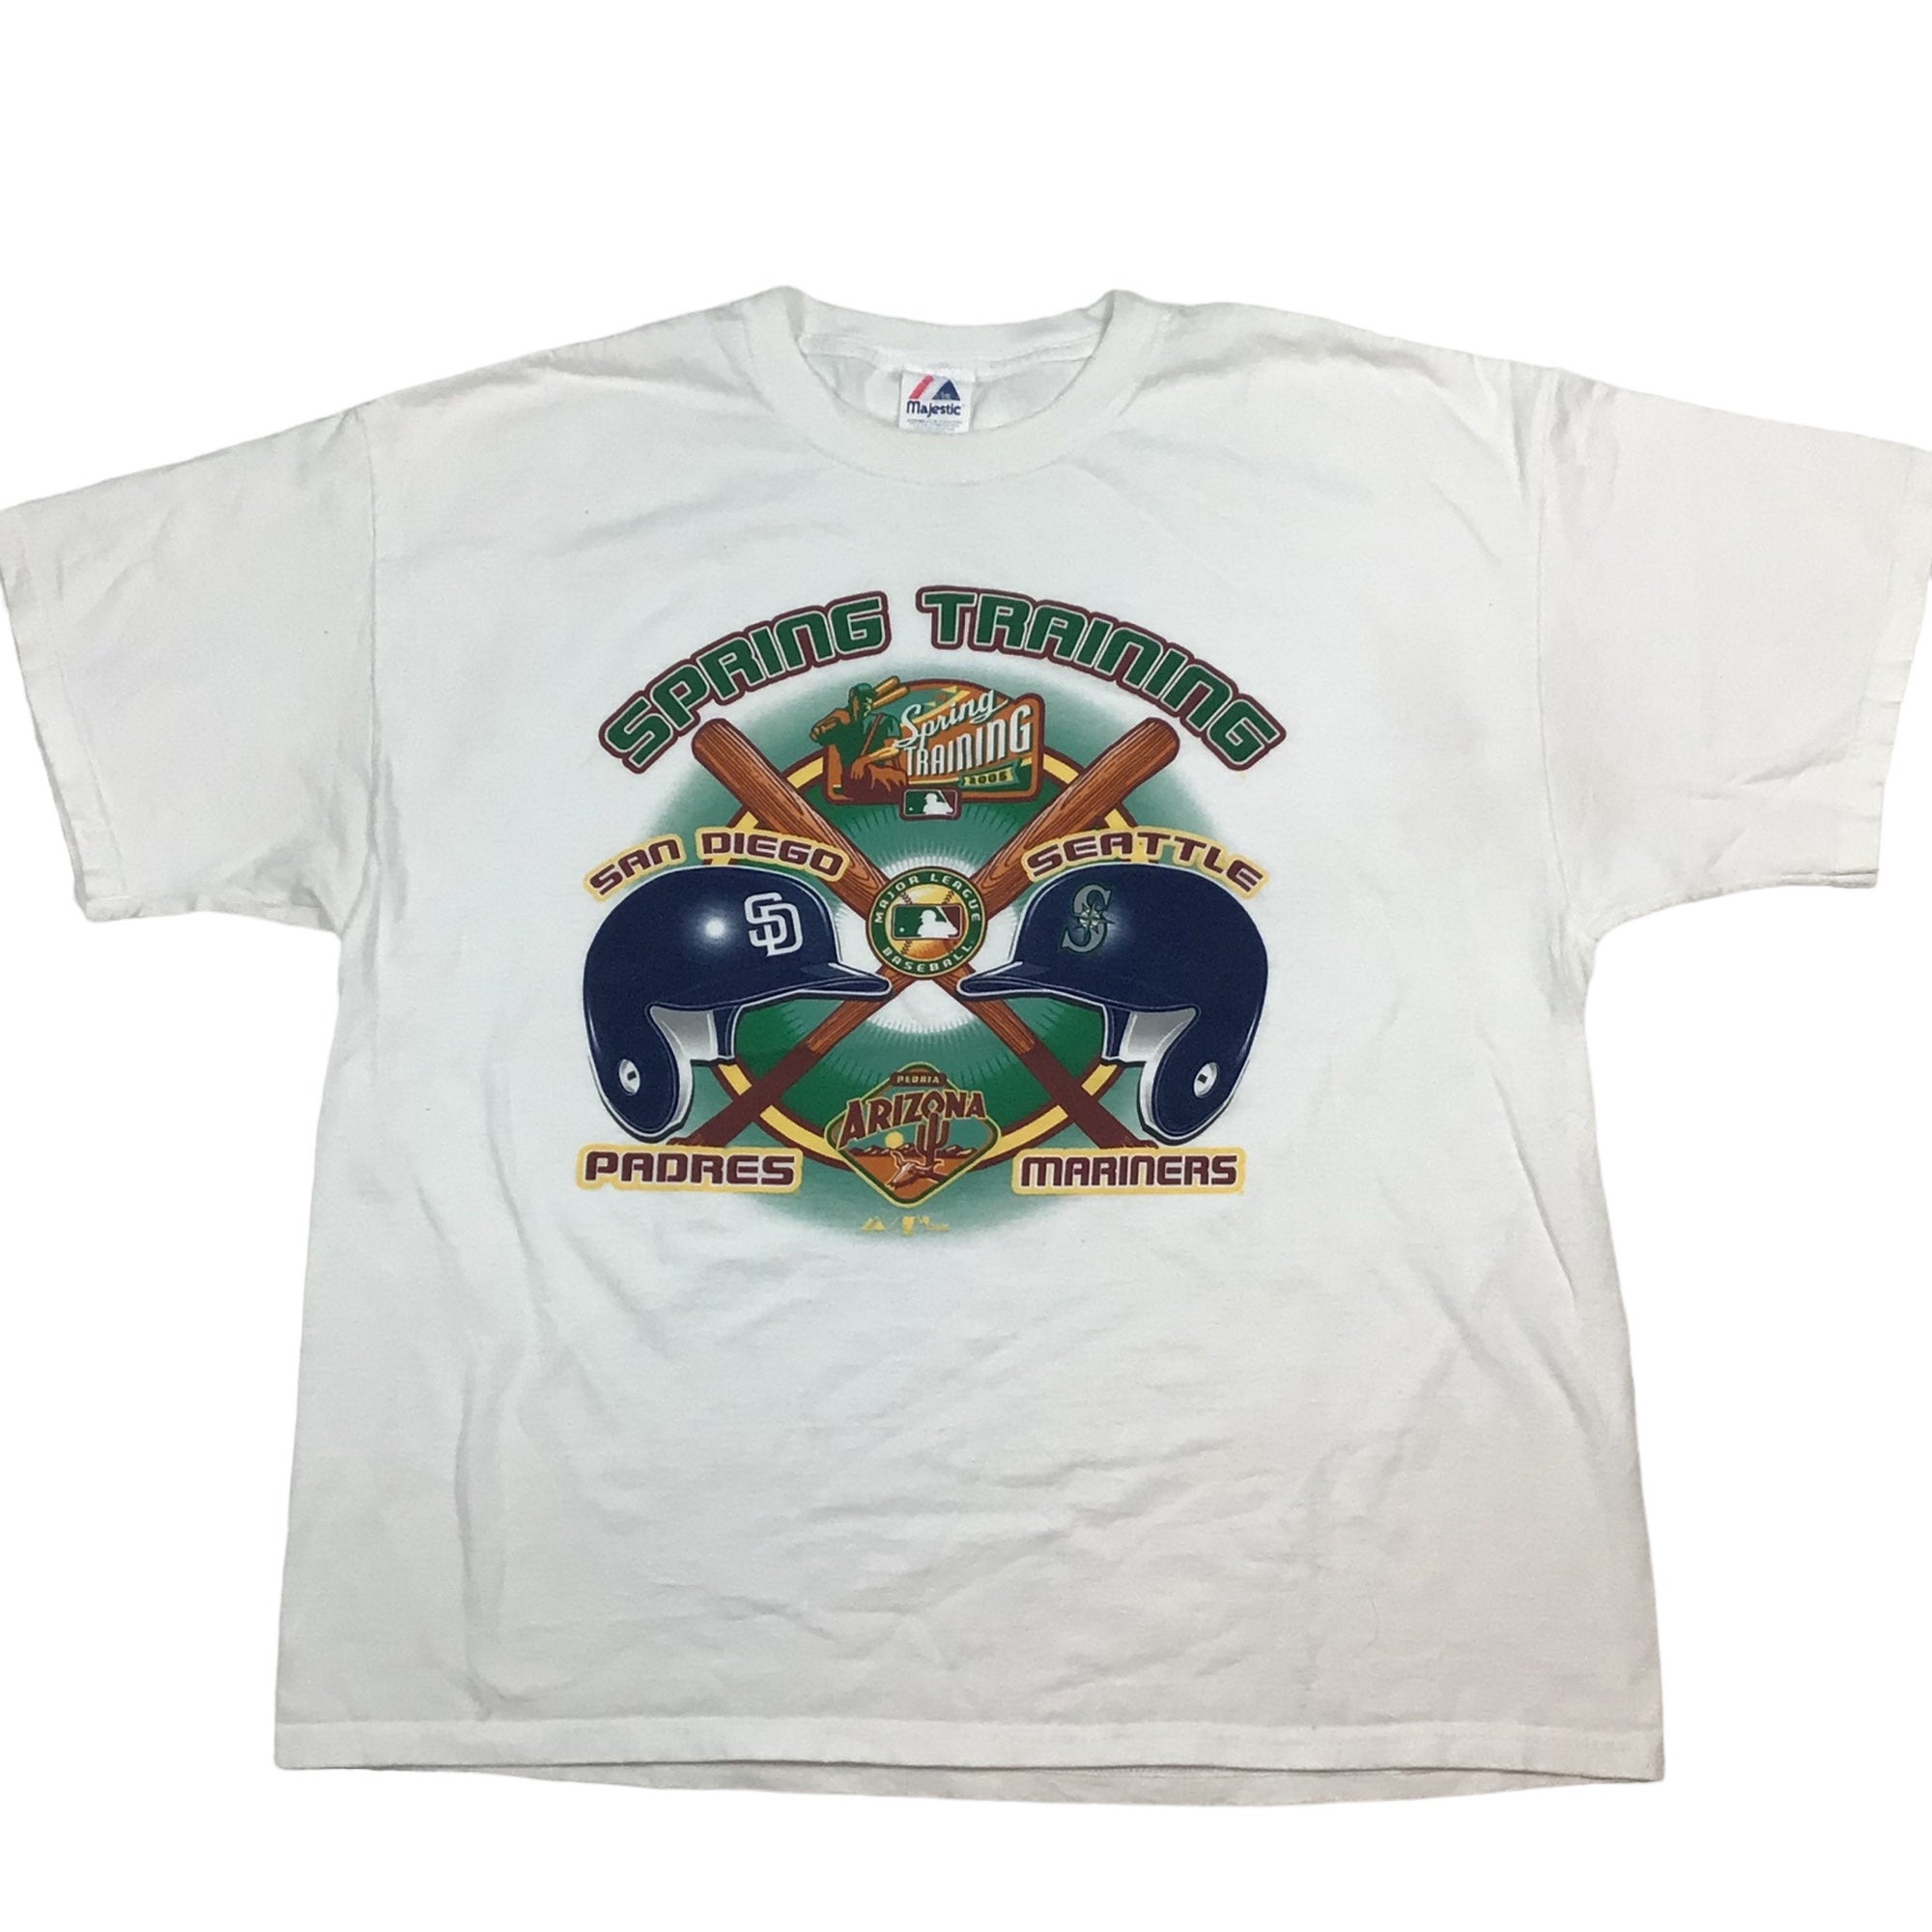 Seattle Mariners spring training t shirt with tag